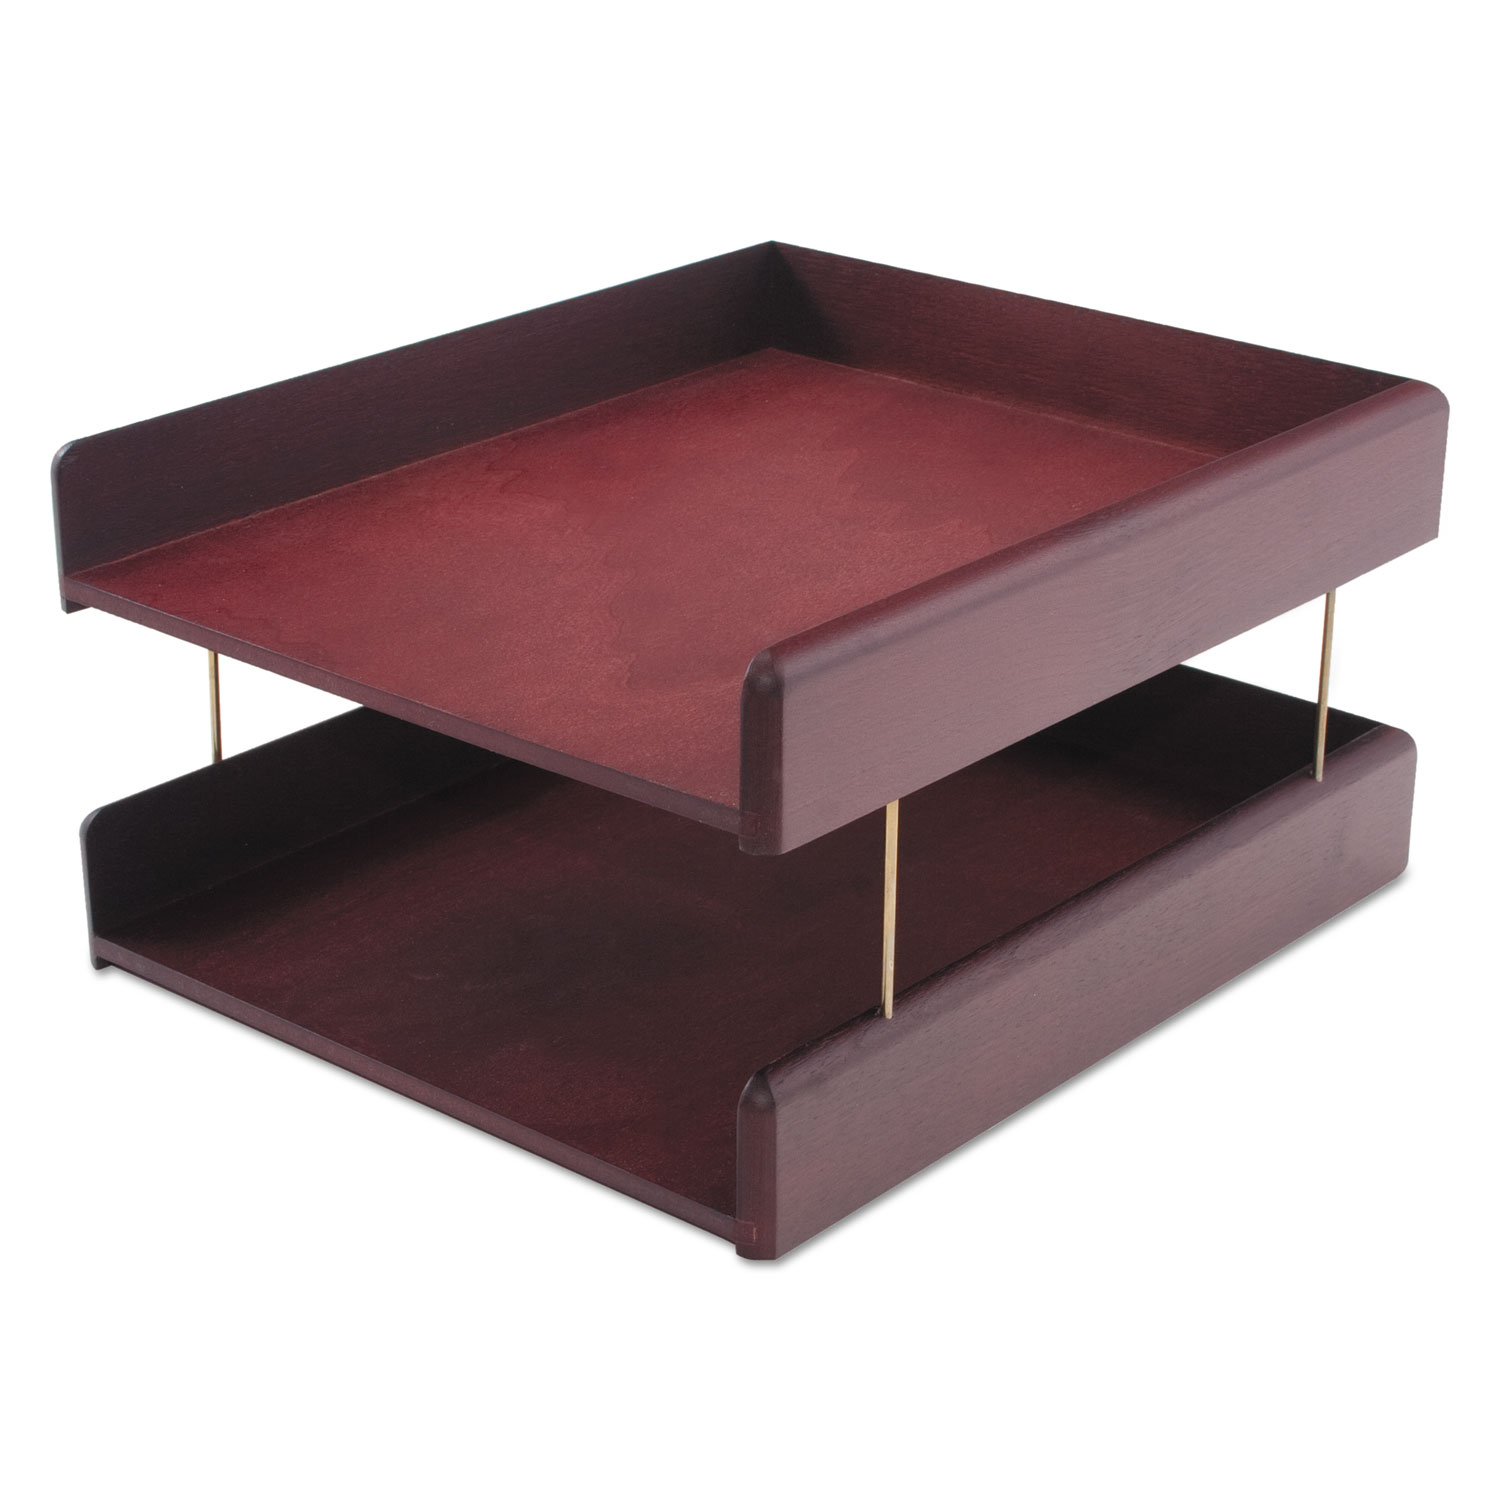  Carver CW02213 Hardwood Double Desk Tray, 2 Sections, Letter Size Files, 10.25 x 12.25 x 5.88, Mahogany (CVR02213) 